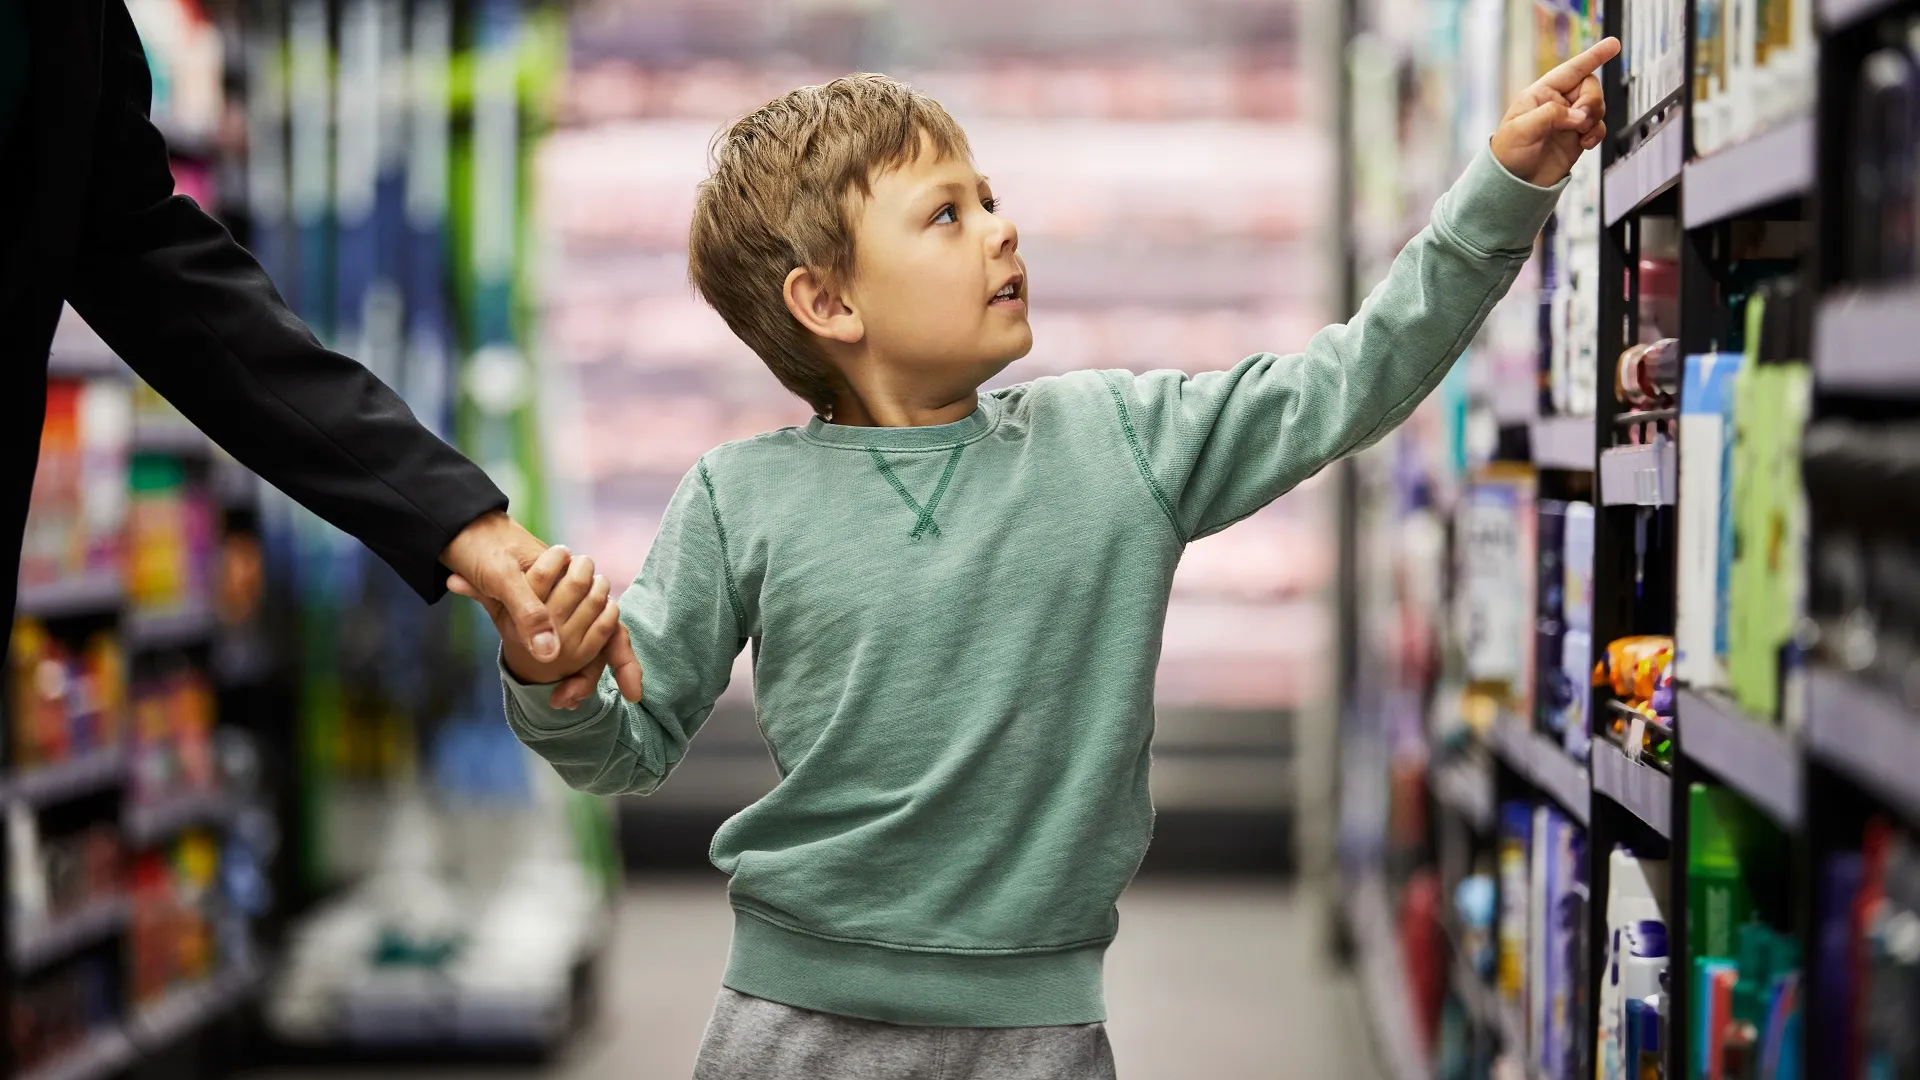 Shot of a little boy take something of a shelf in a supermarket stock photo